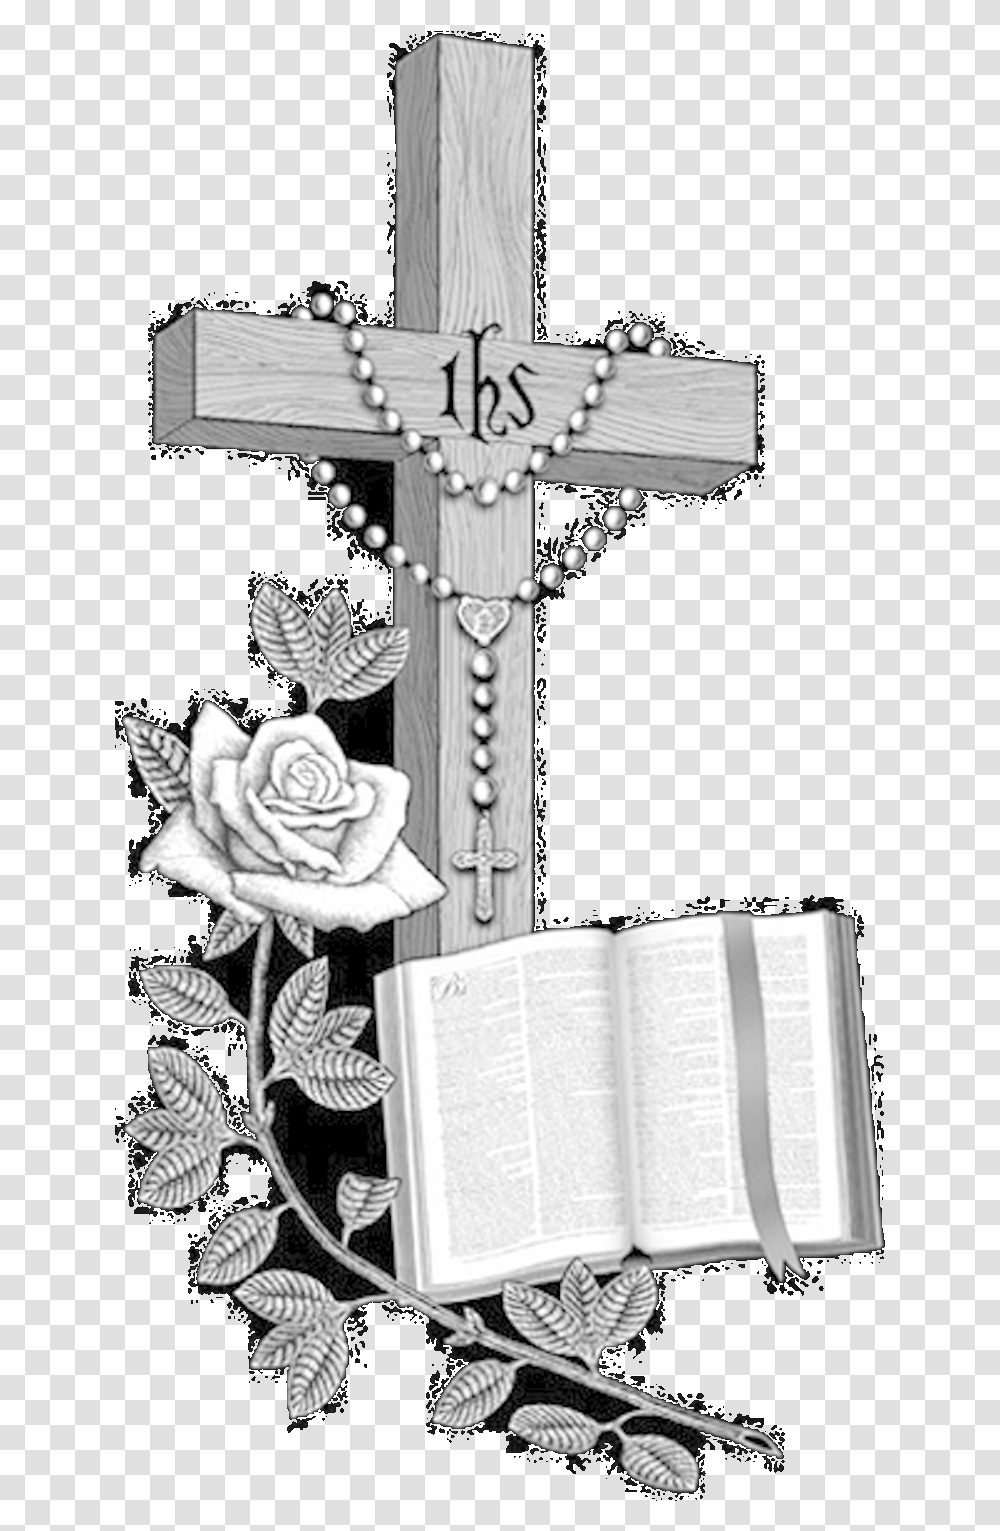 Crucifix Tombstone Cross Praying Hands With A Cross Transparent Png